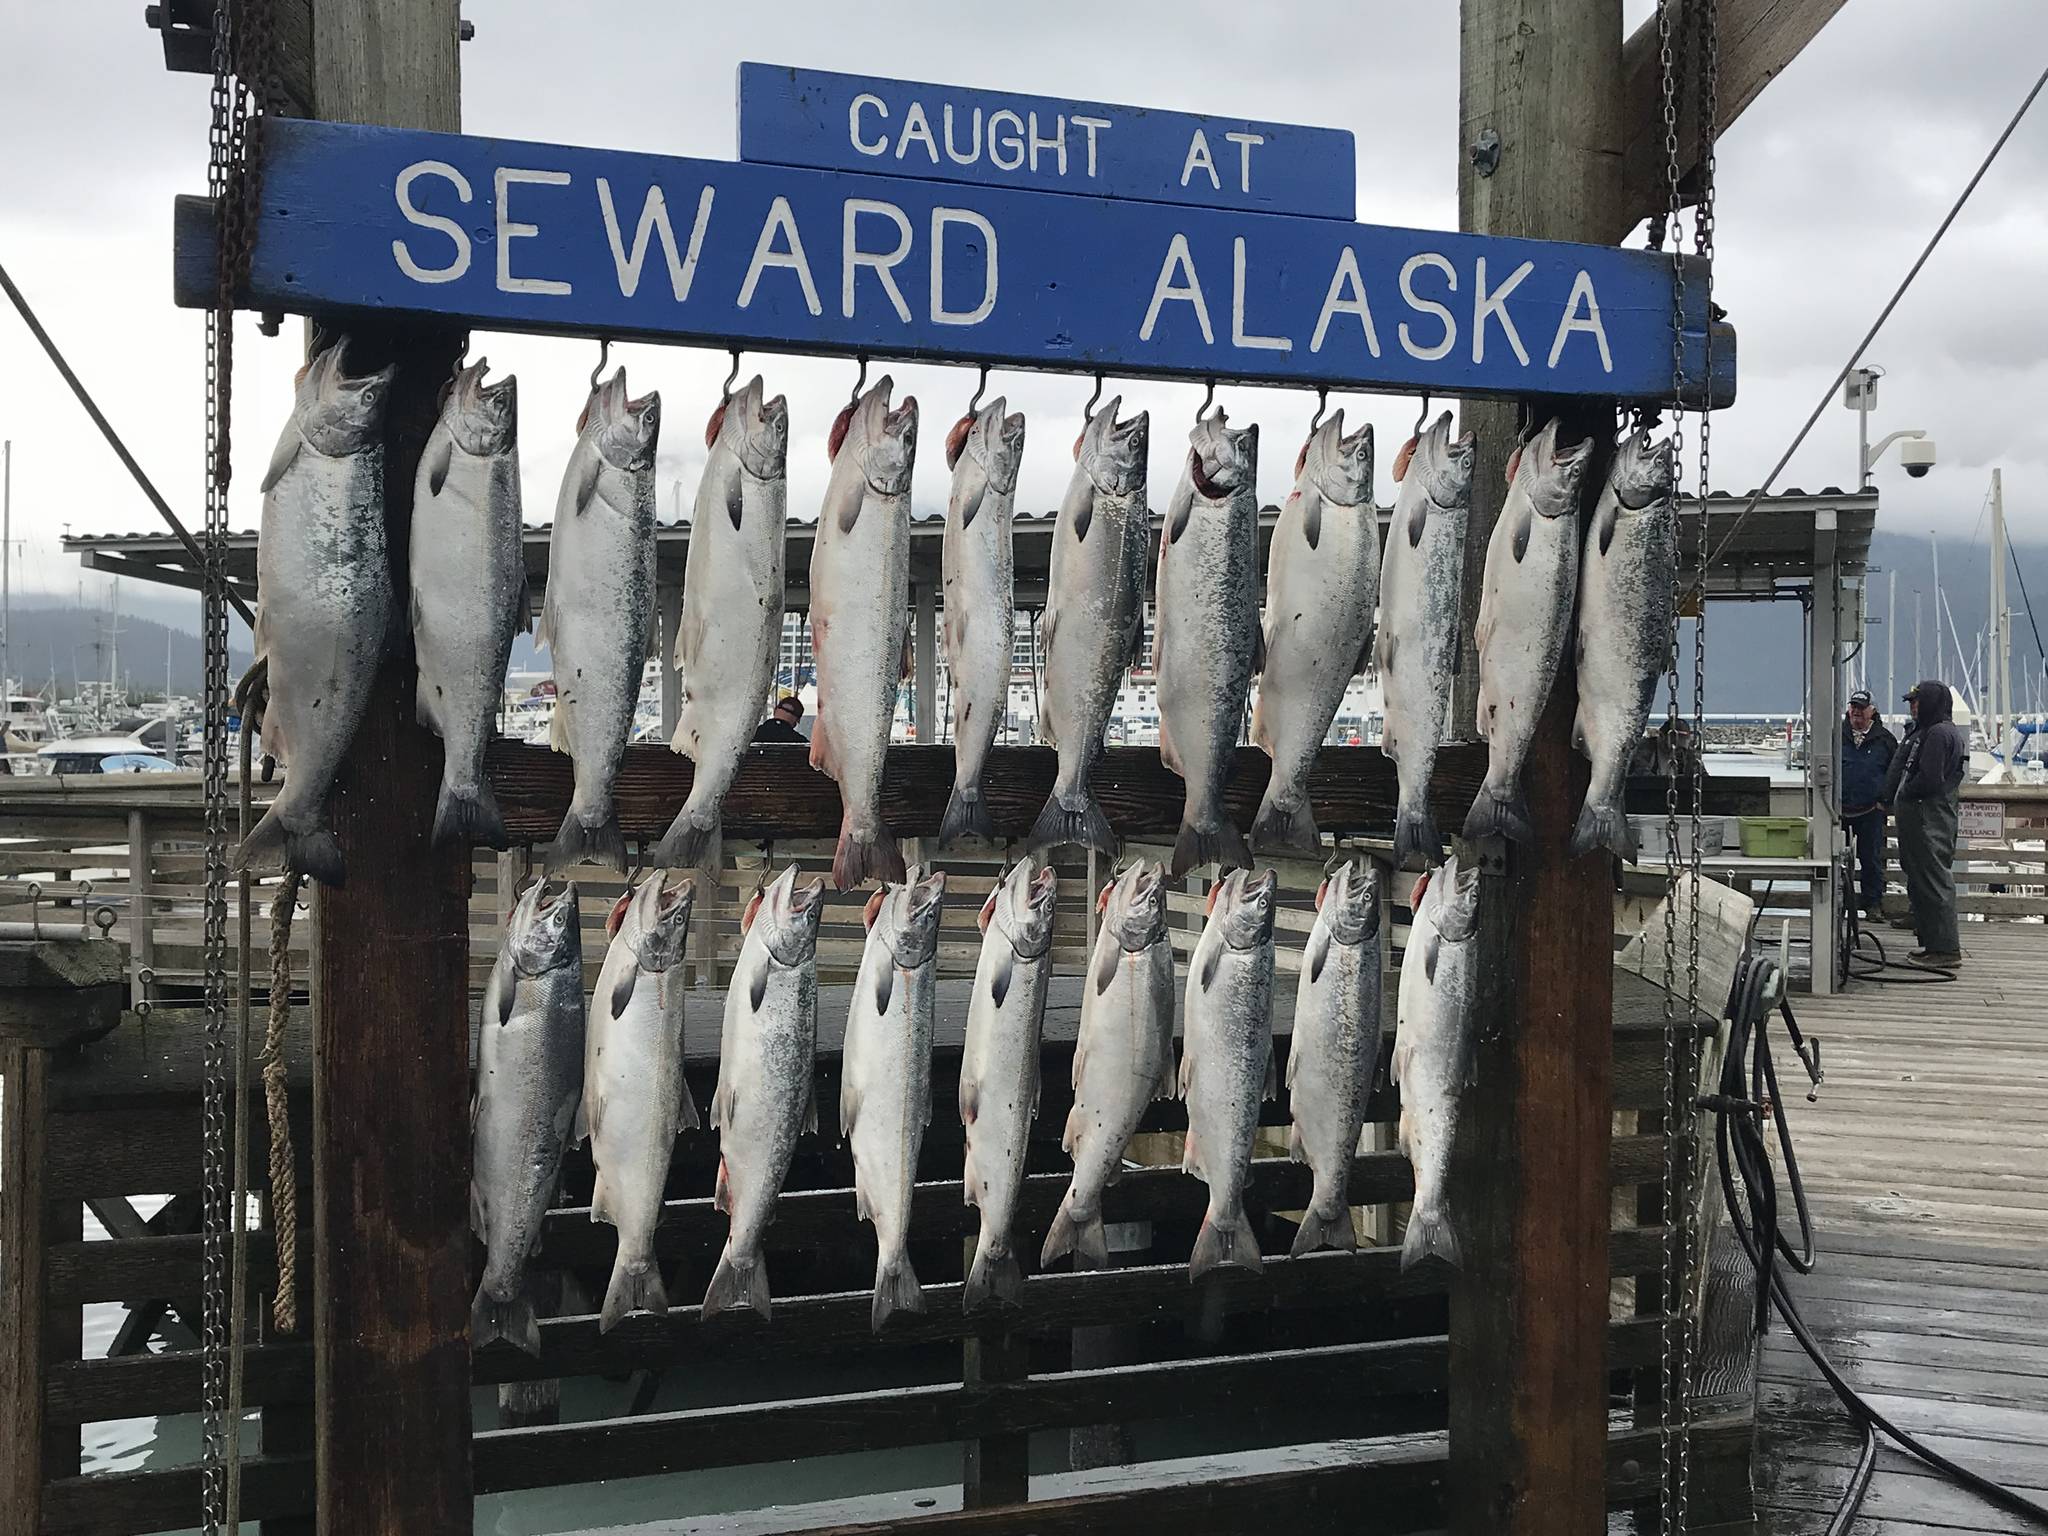 Silver salmon hang in the Seward Boat Harbor during the 2018 Seward Silver Salmon Derby, which starts this Saturday, Aug. 10. (Photo courtesy of Seward Chamber of Commerce)